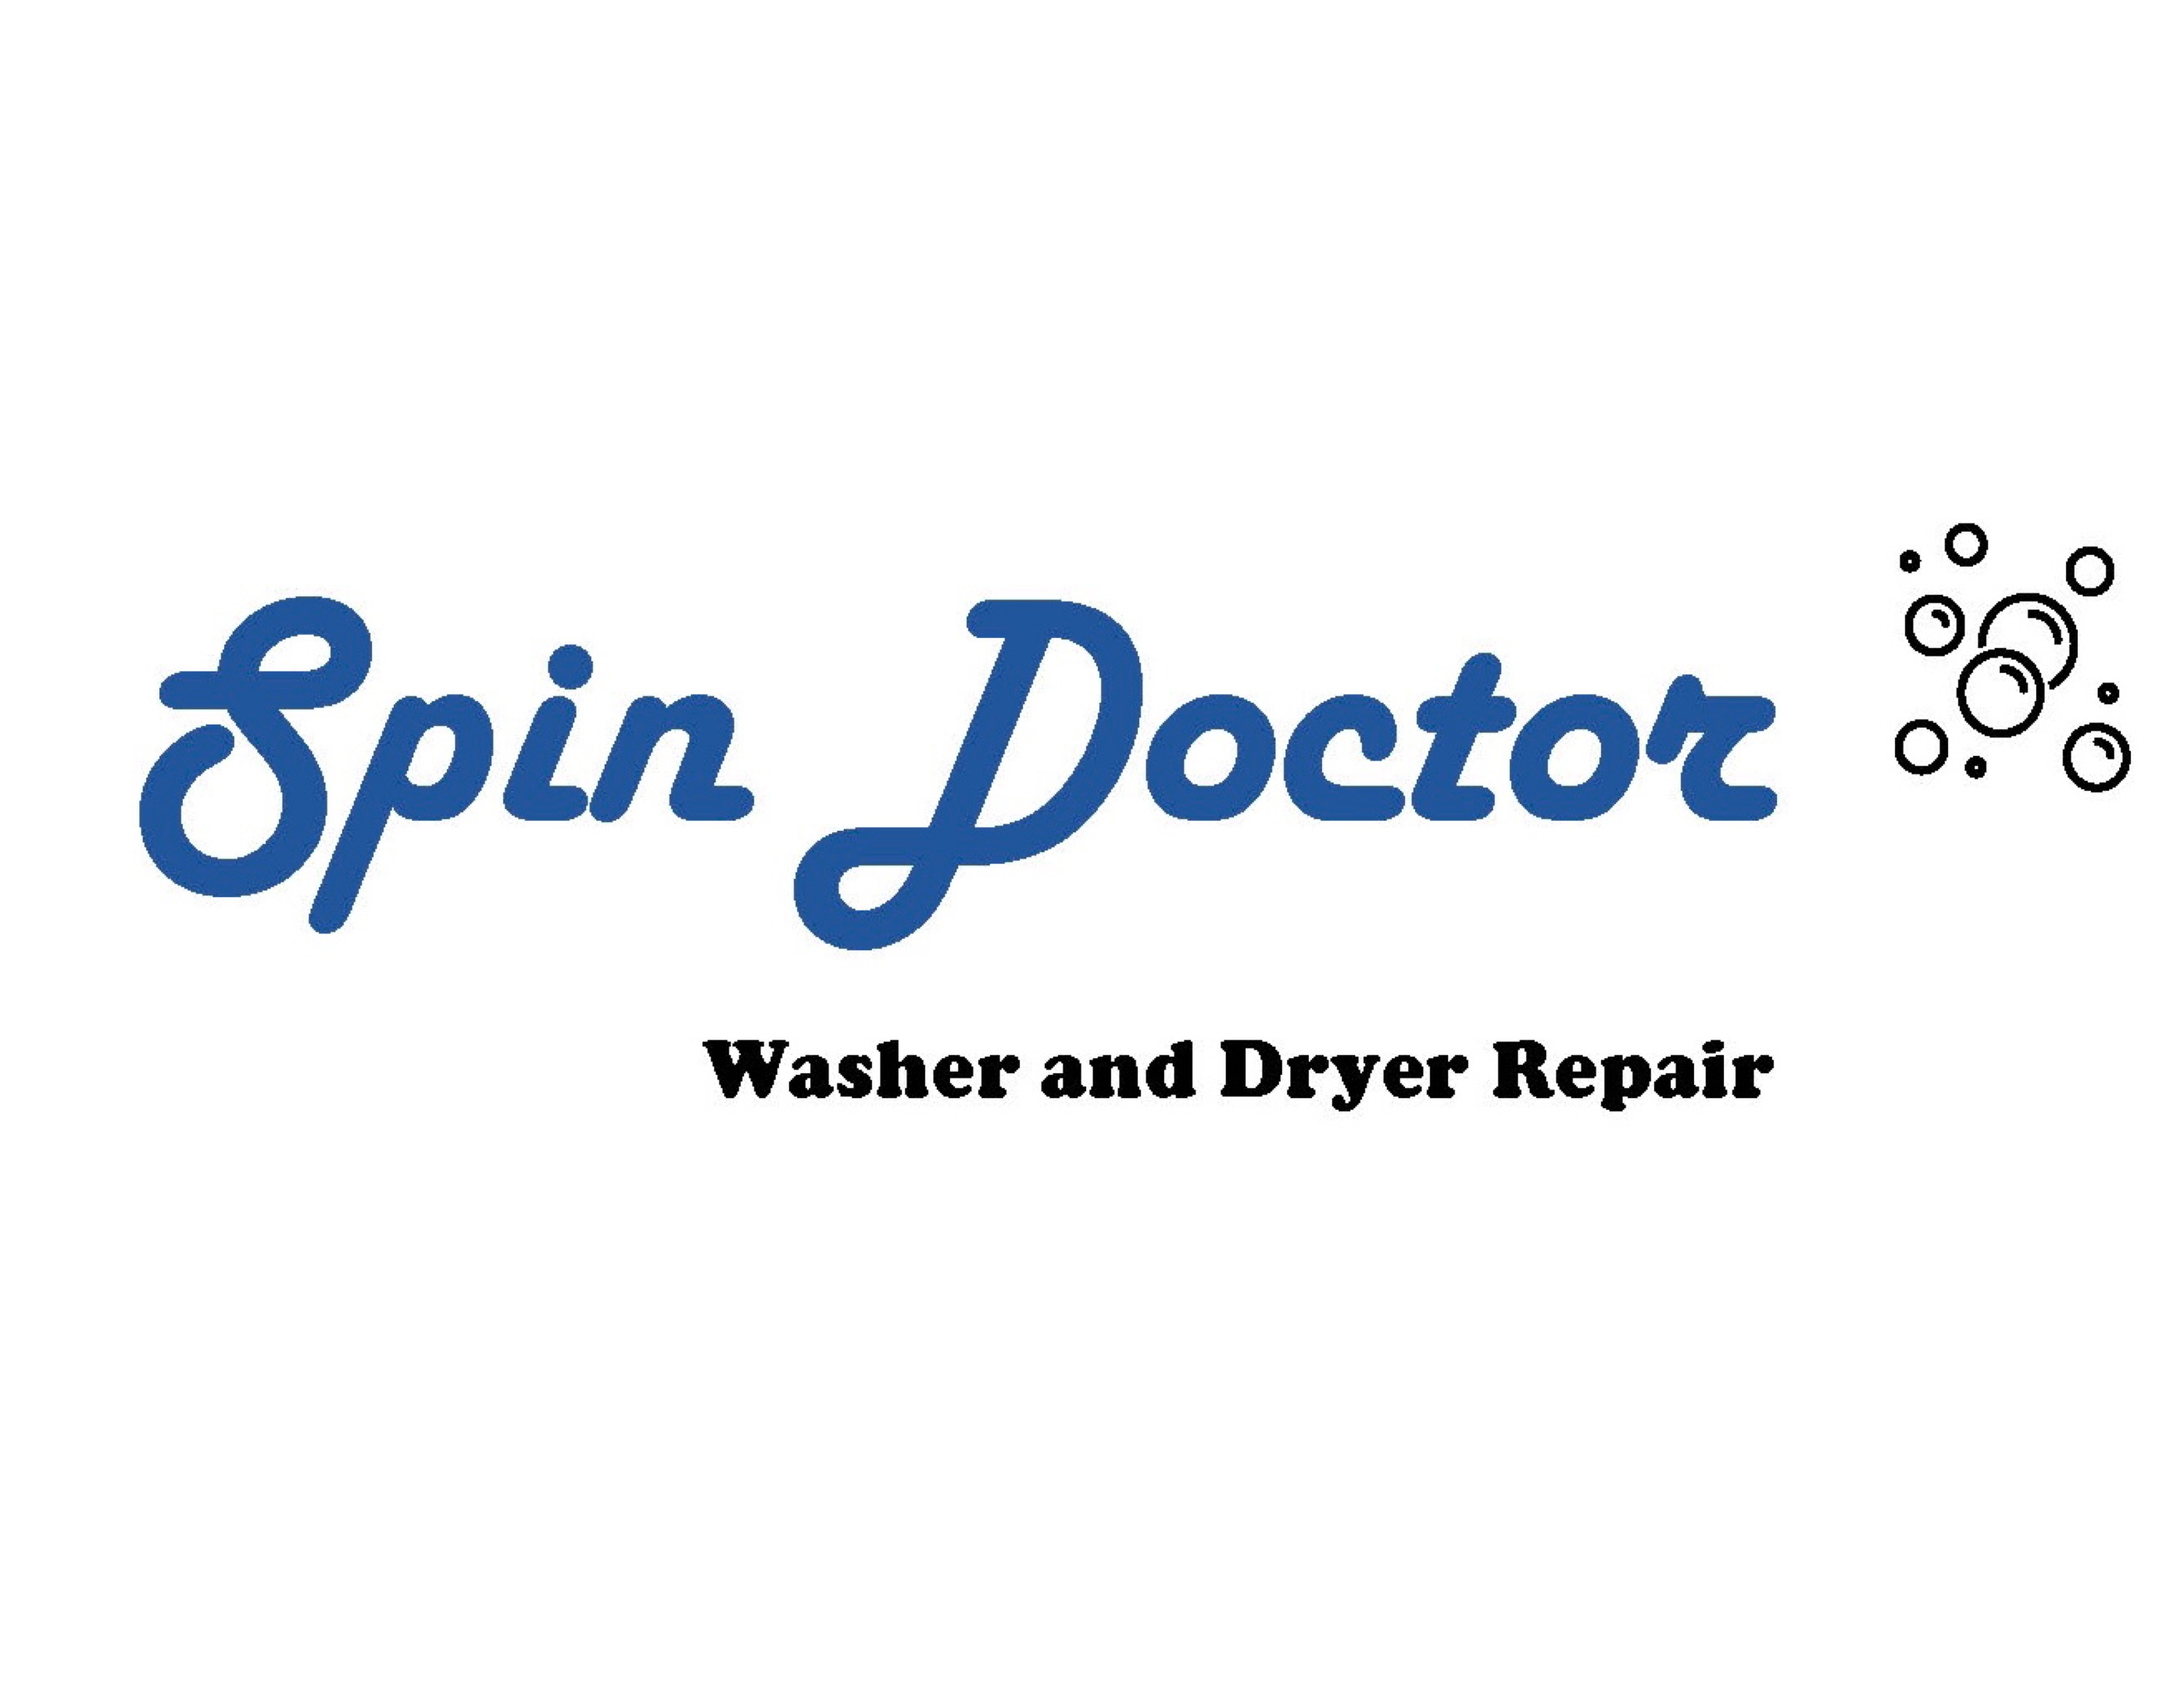 The Spin Doctor Washer & Dryer Repair Logo